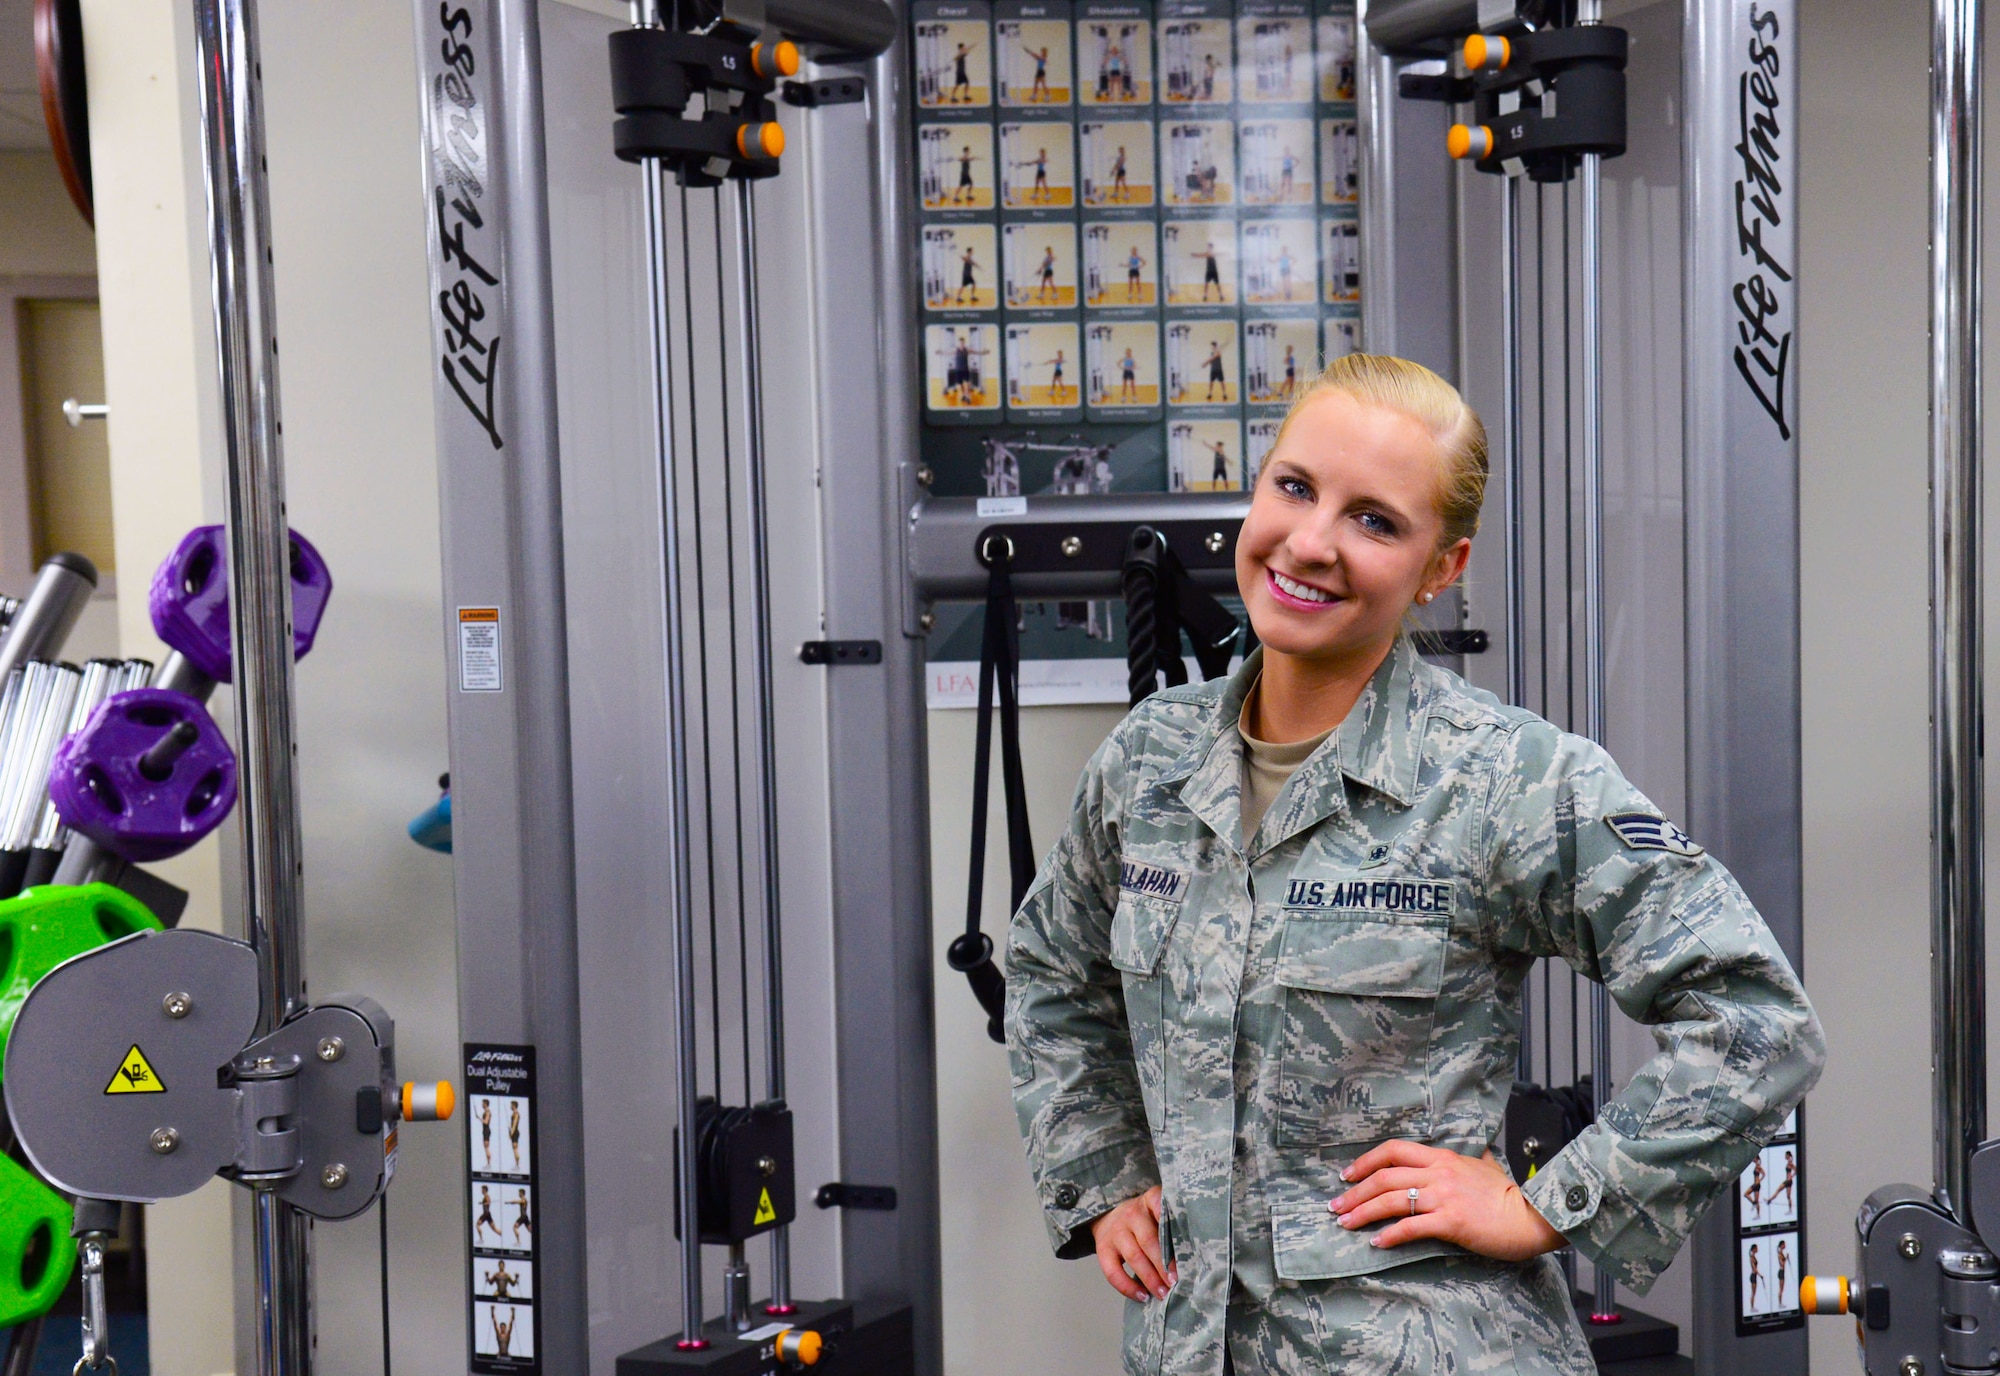 Senior Airman Kaitlyn Callahan, 341st Medical Operations Squadron physical medicine technician, poses for a photo Feb. 22, 2017, at Malmstrom Air Force Base, Mont. Callahan recently received the U.S. Air Force Physical Medicine Airman of the Year award. (U.S. Air Force photo/Airman 1st Class Magen M. Reeves)